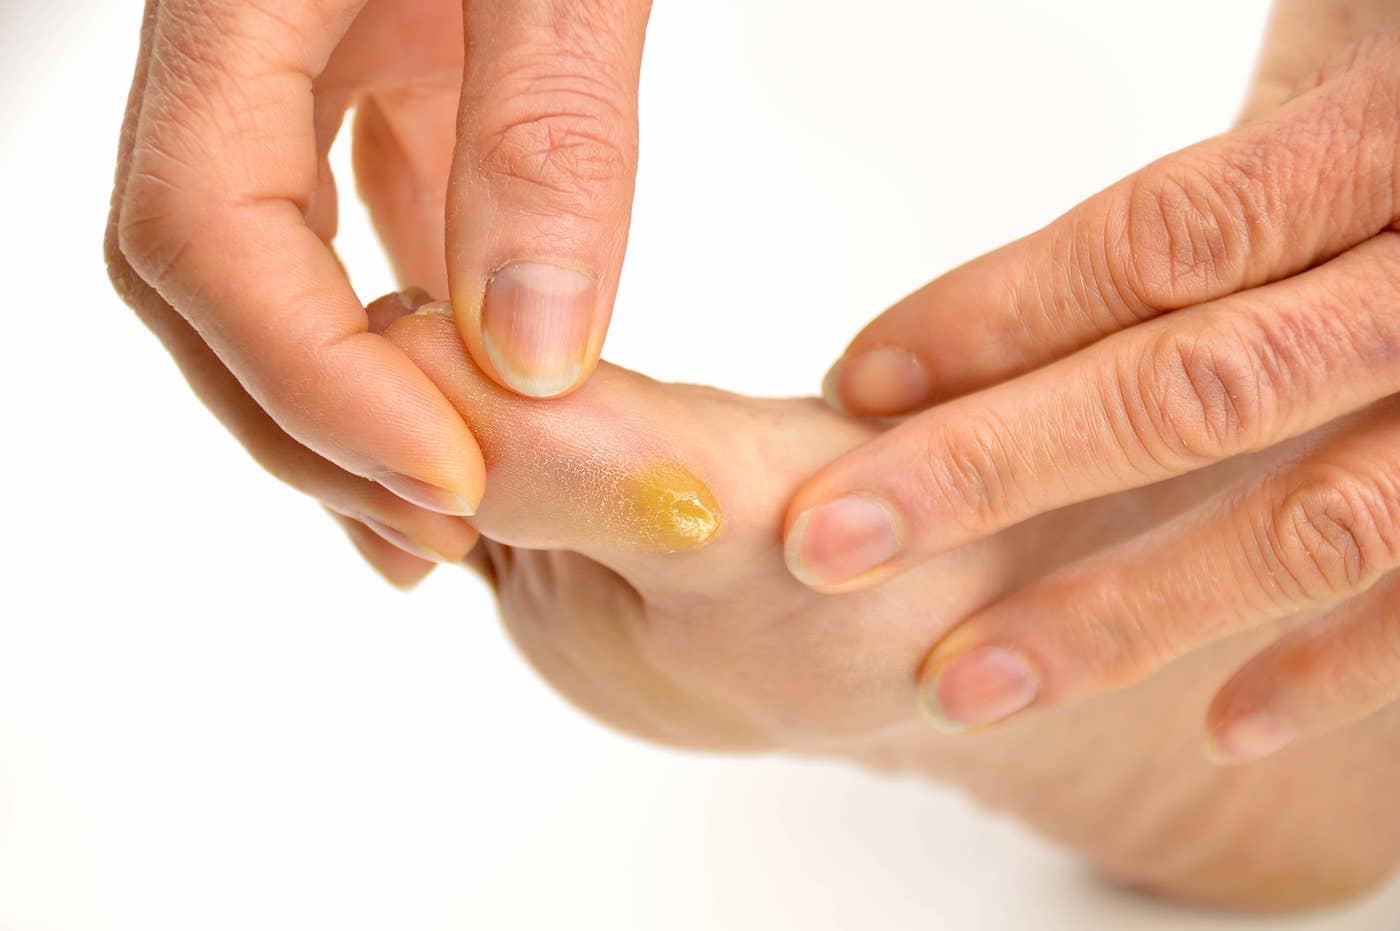 How to Prevent Calluses on Feet